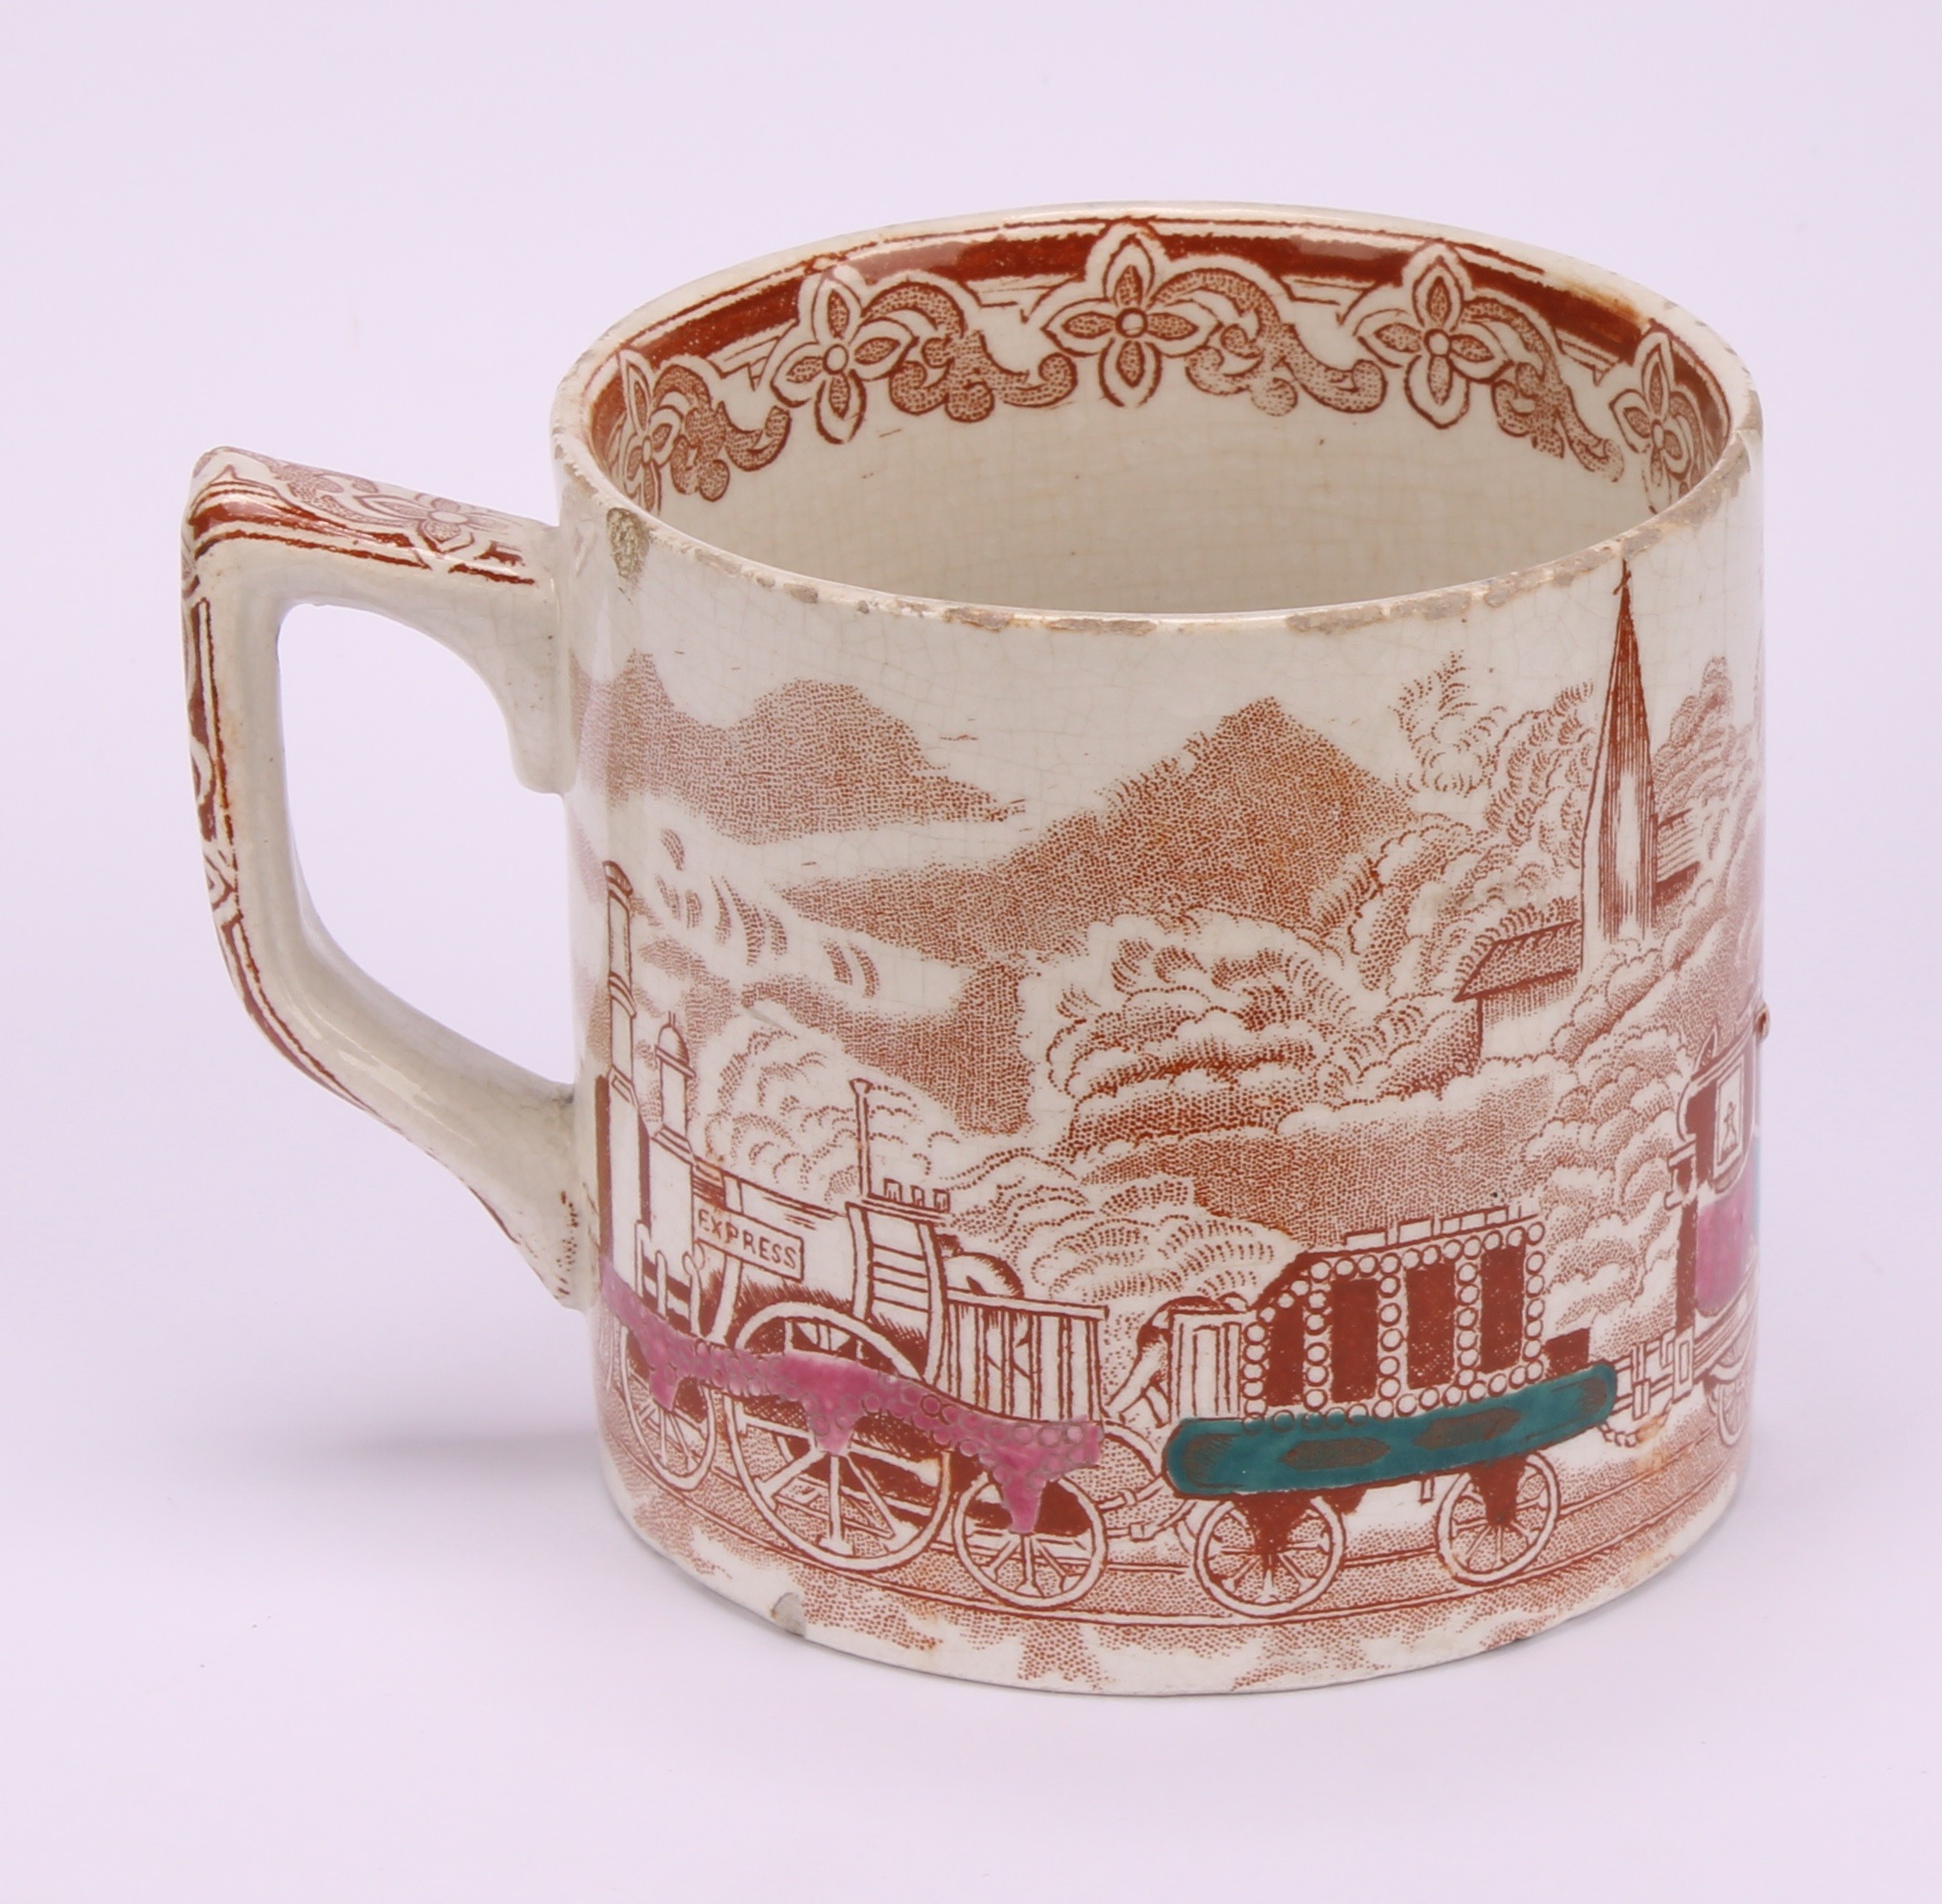 Railway Interest - steam locomotives, a 19th century Staffordshire pearlware mug, printed in sepia - Image 7 of 10